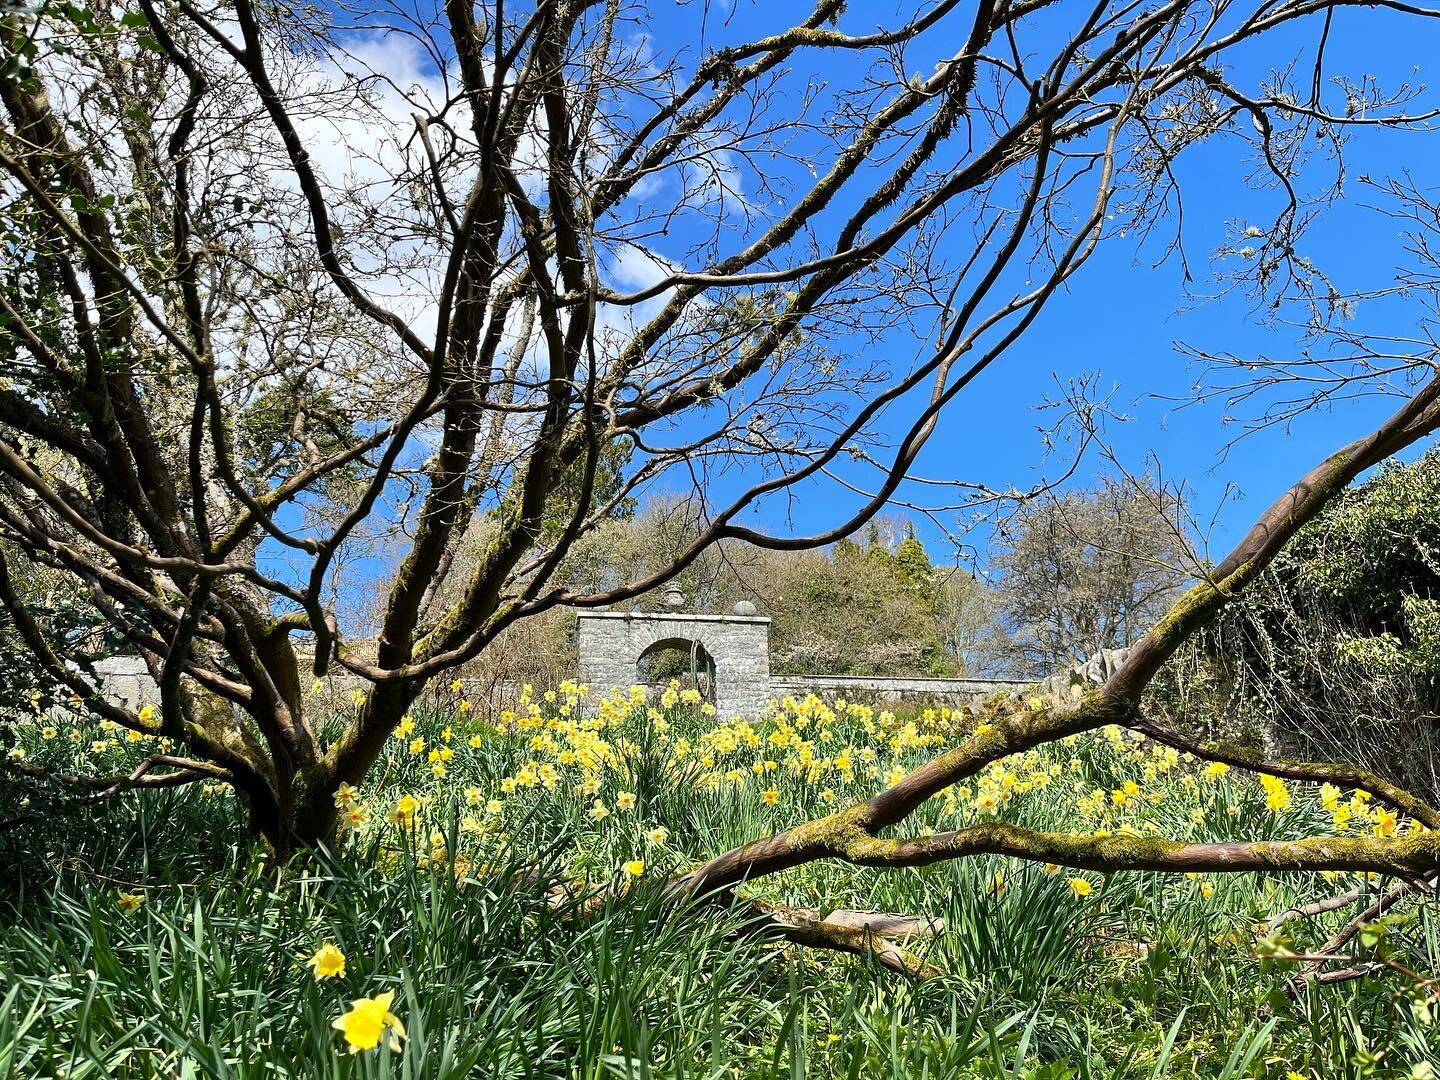 Blue skies over the walled garden today and a lovely walk along the Peel road. There&rsquo;s so much to explore @theyairscotland - check our website for availability in our lovely cottages!
.
.
.
#sunshine #springtime #walkscottishborders #outandabou